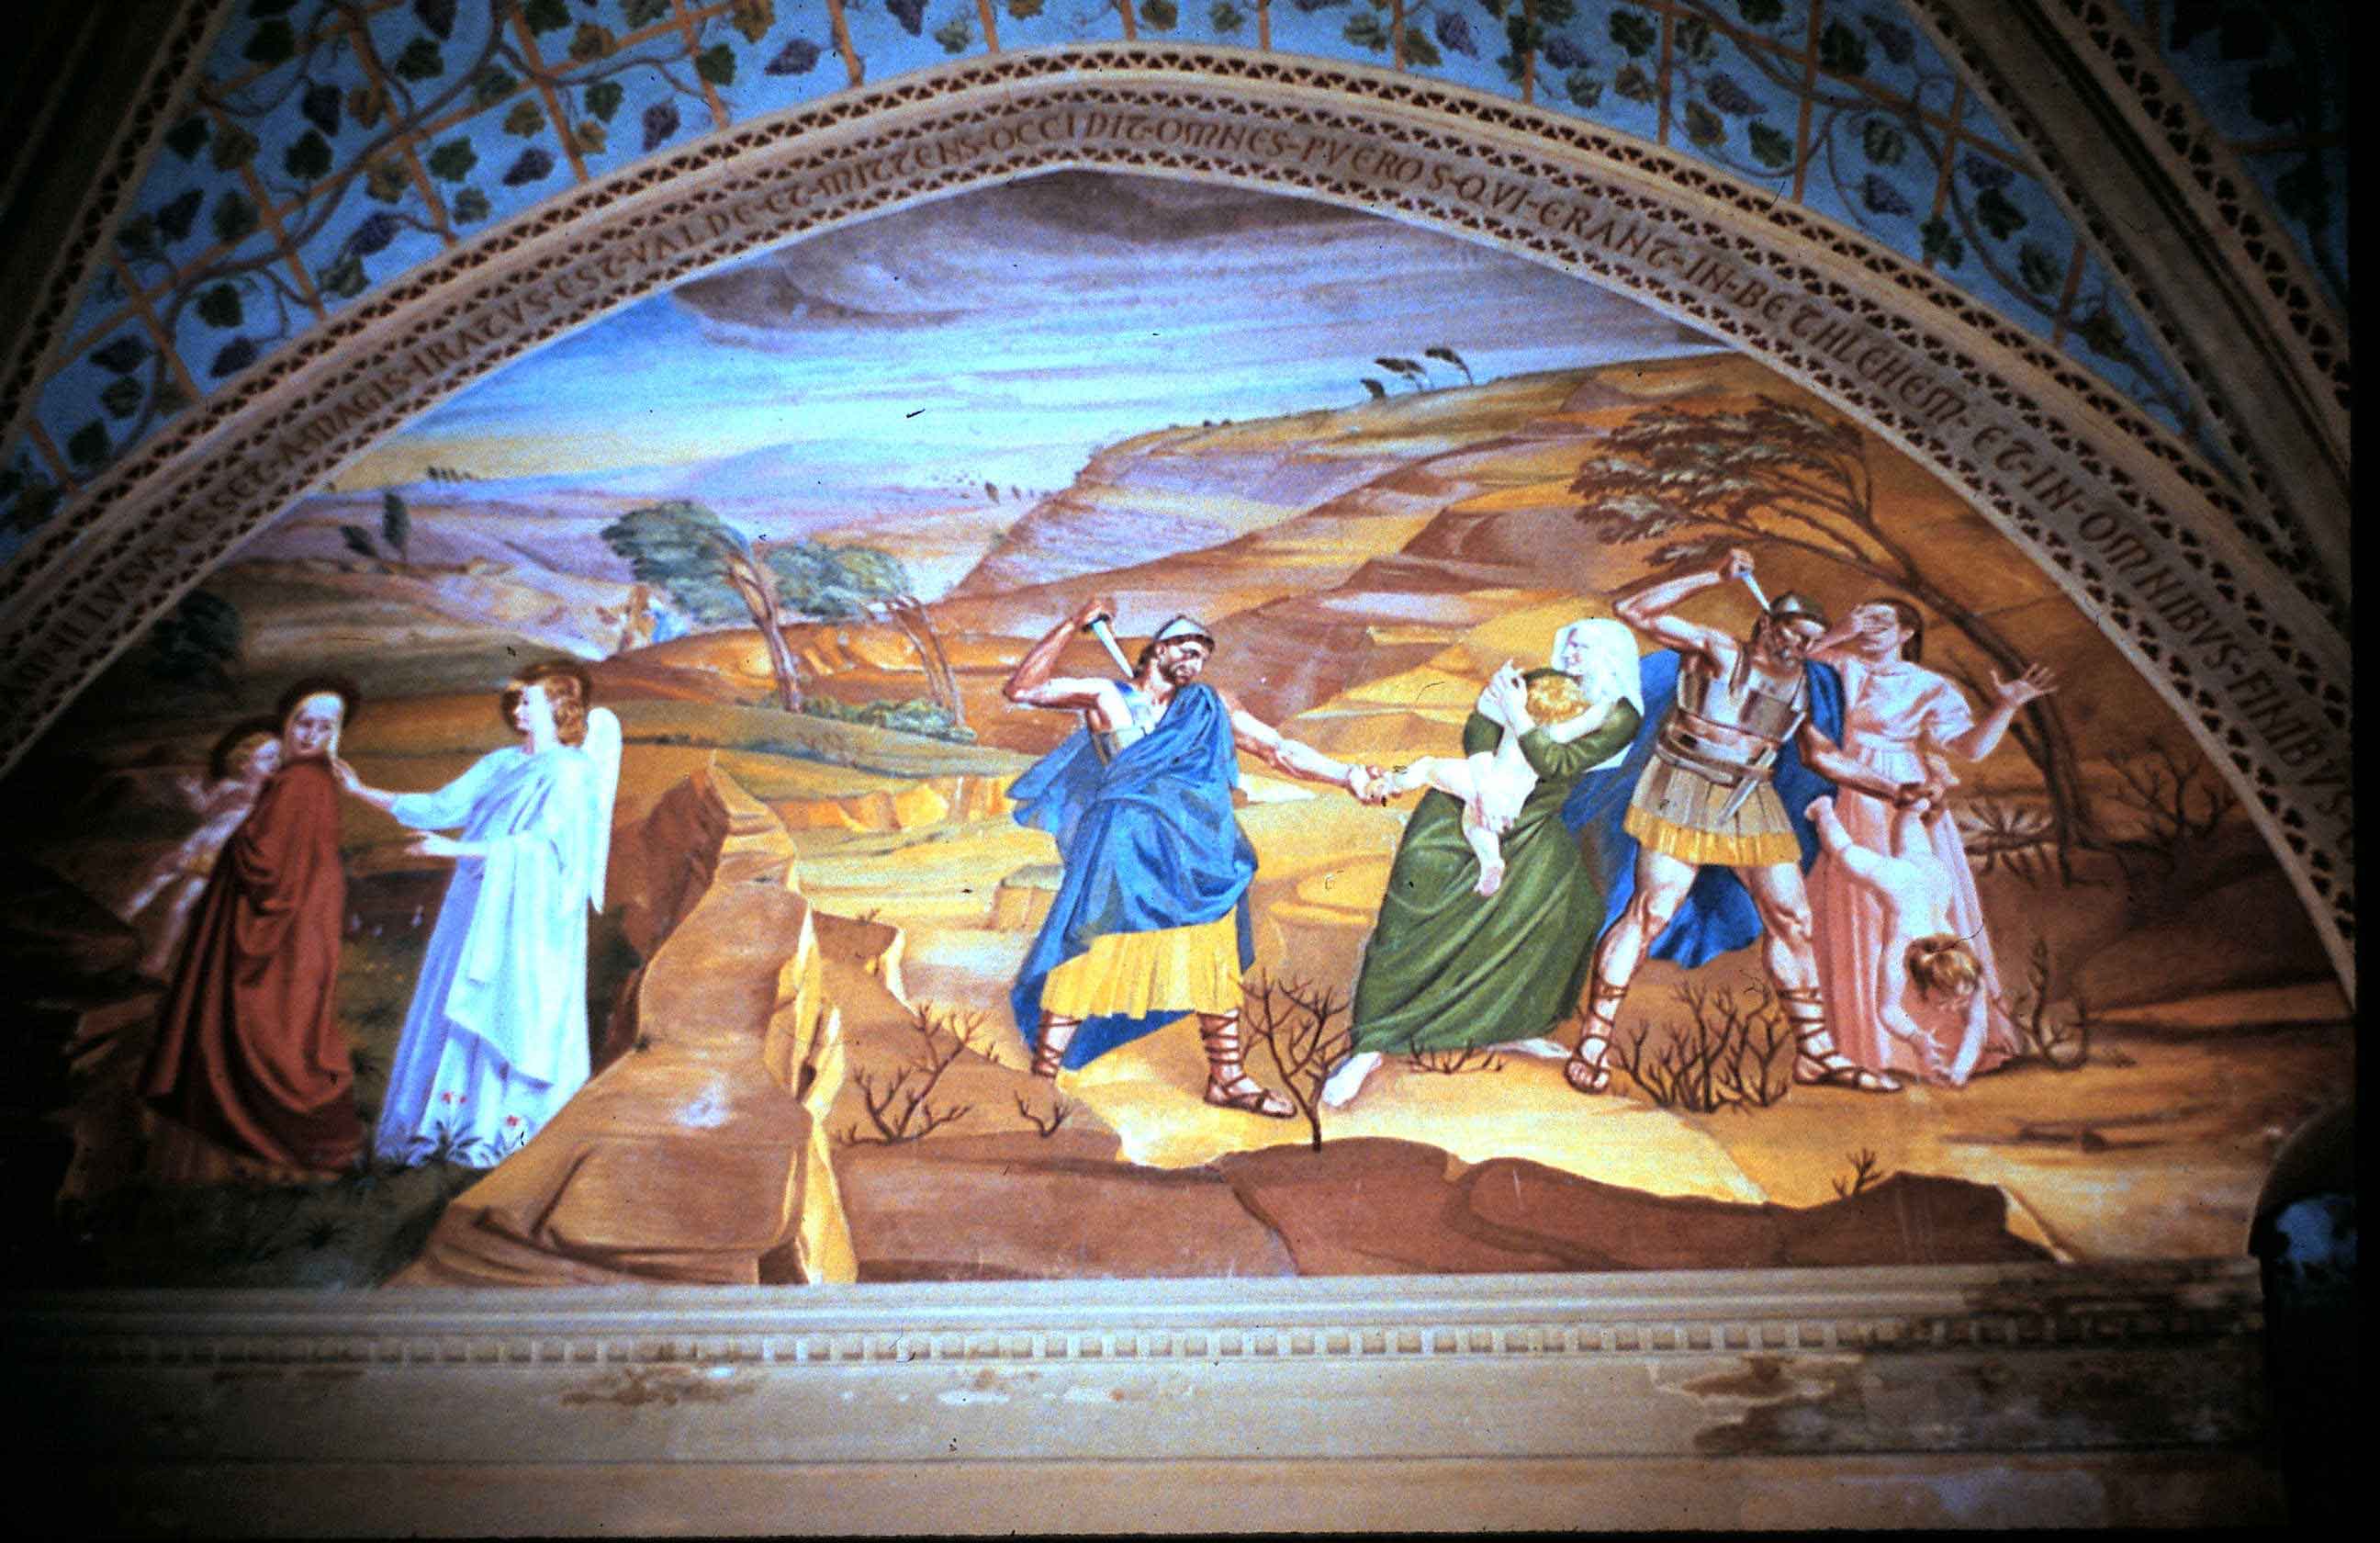 Mural of the Murder of the Innocents